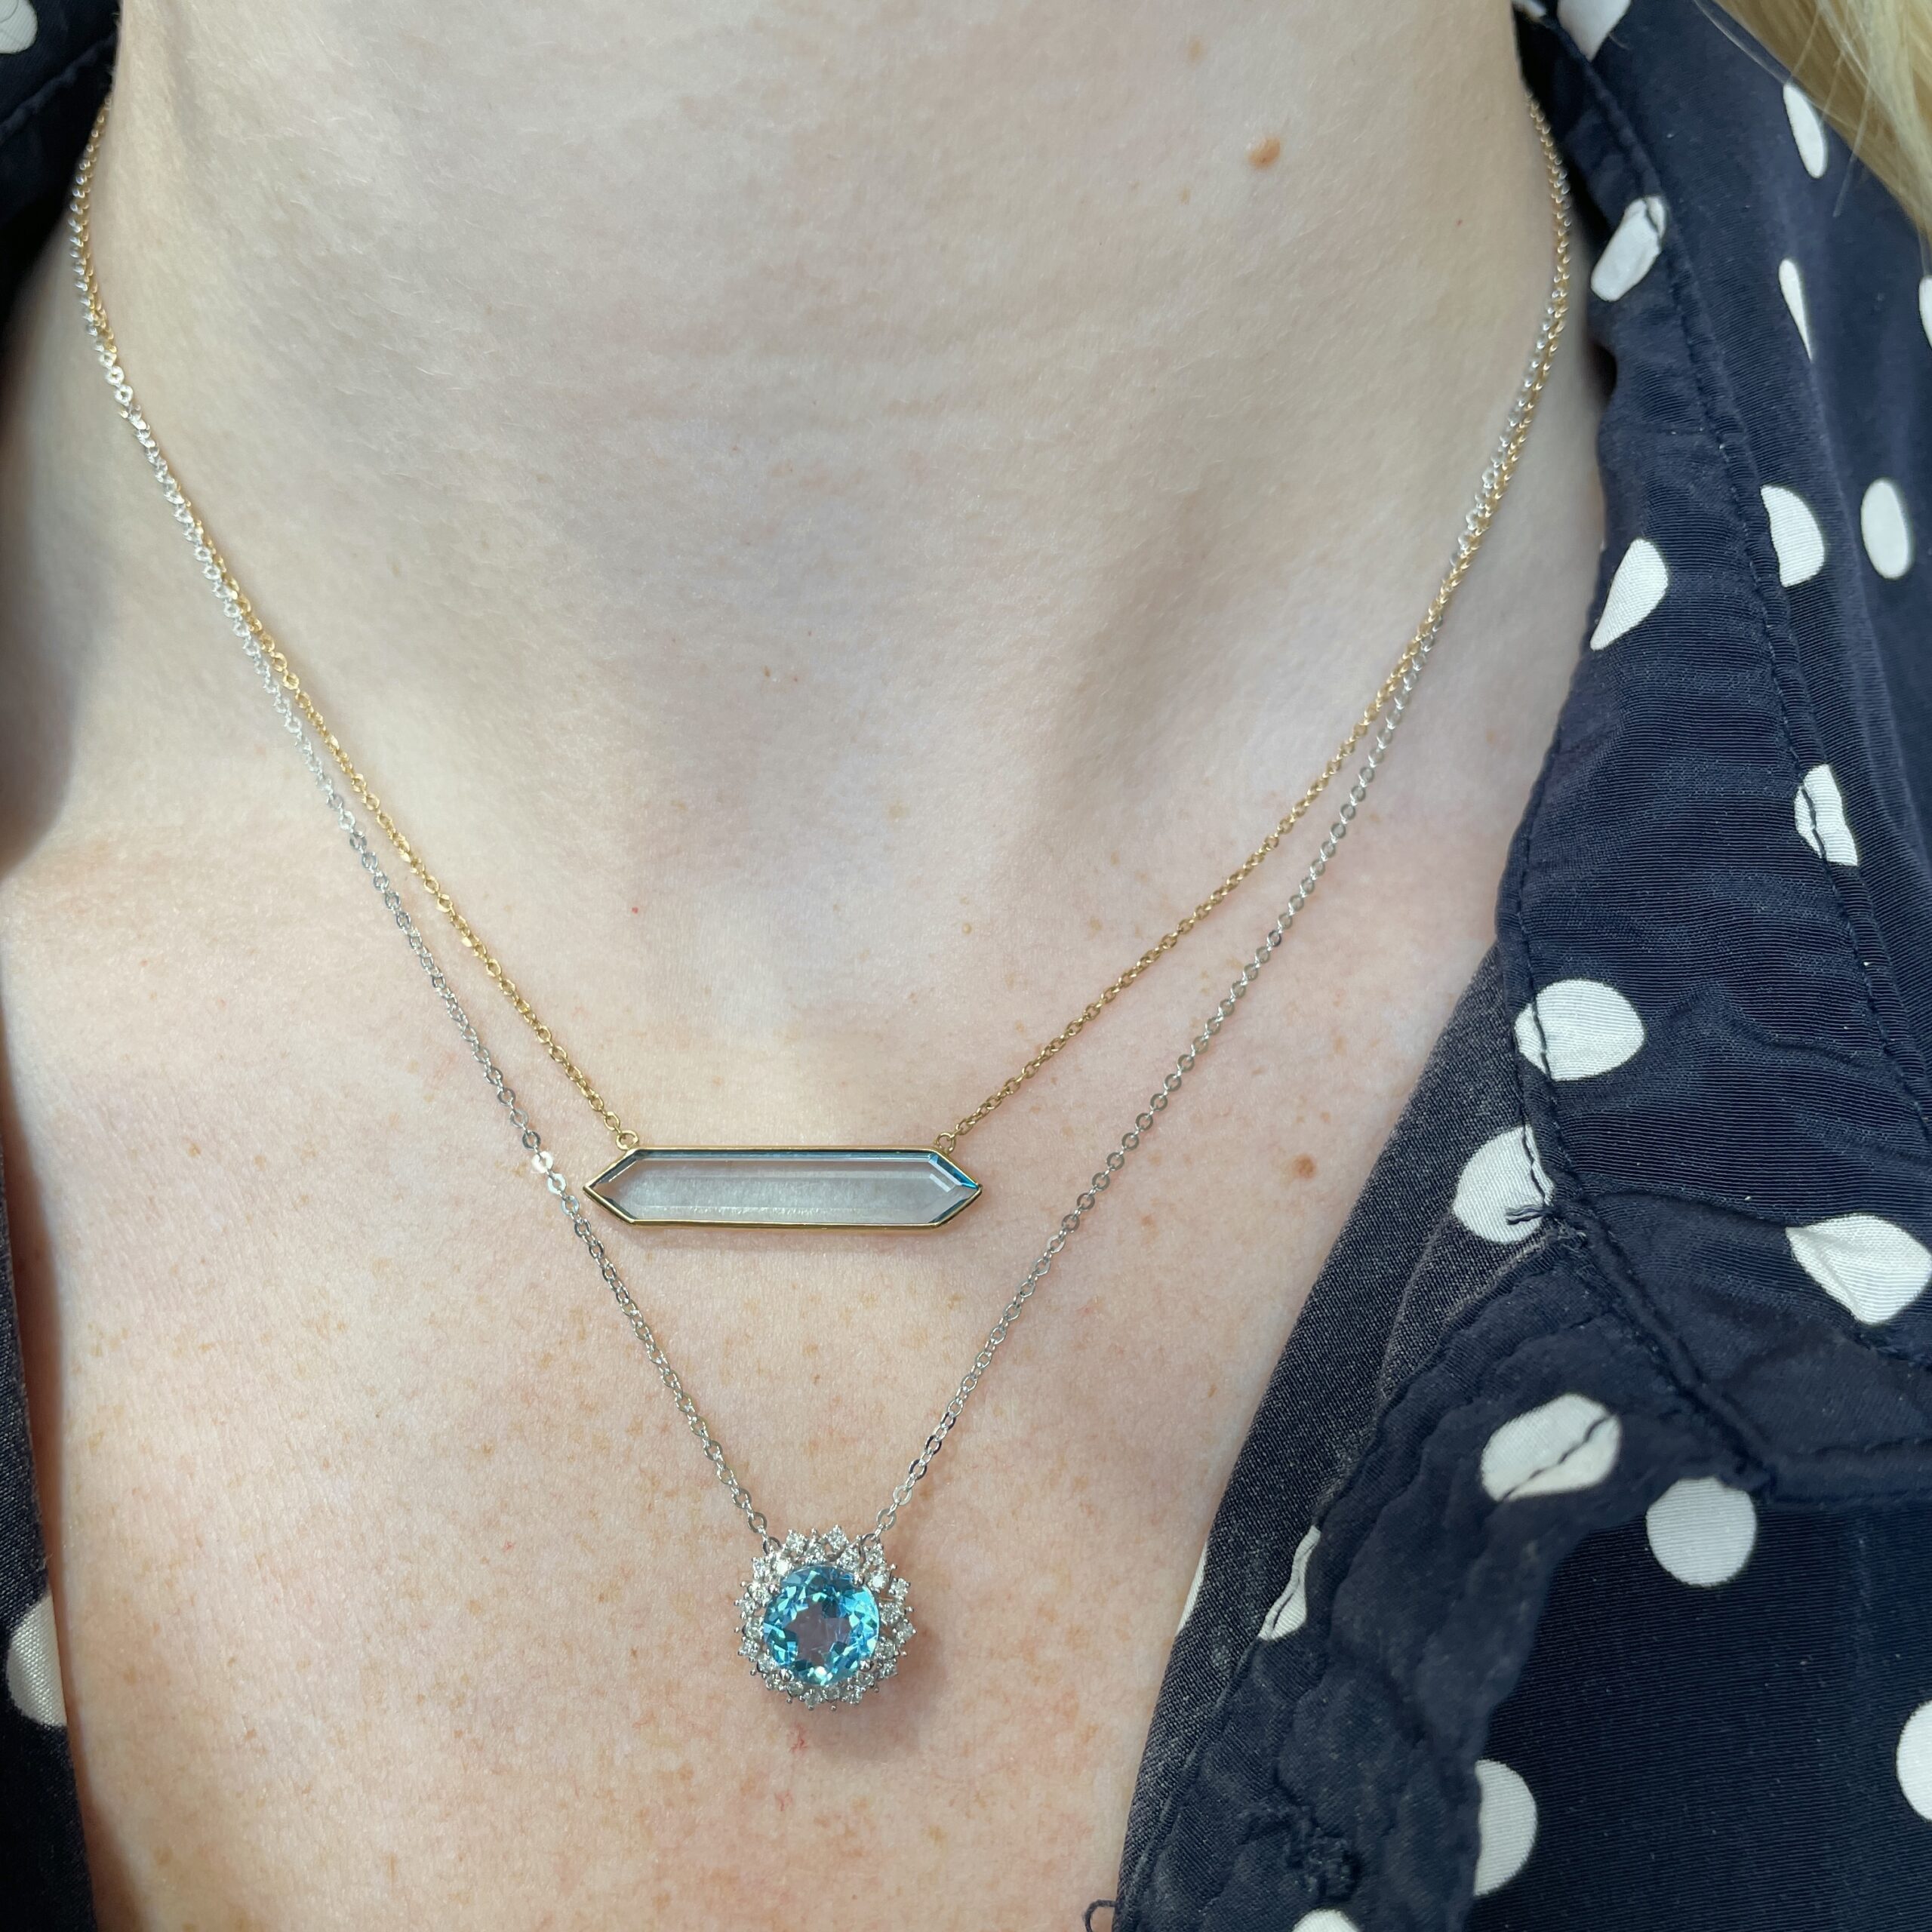 White Gold Necklace with Blue Topaz and Diamonds